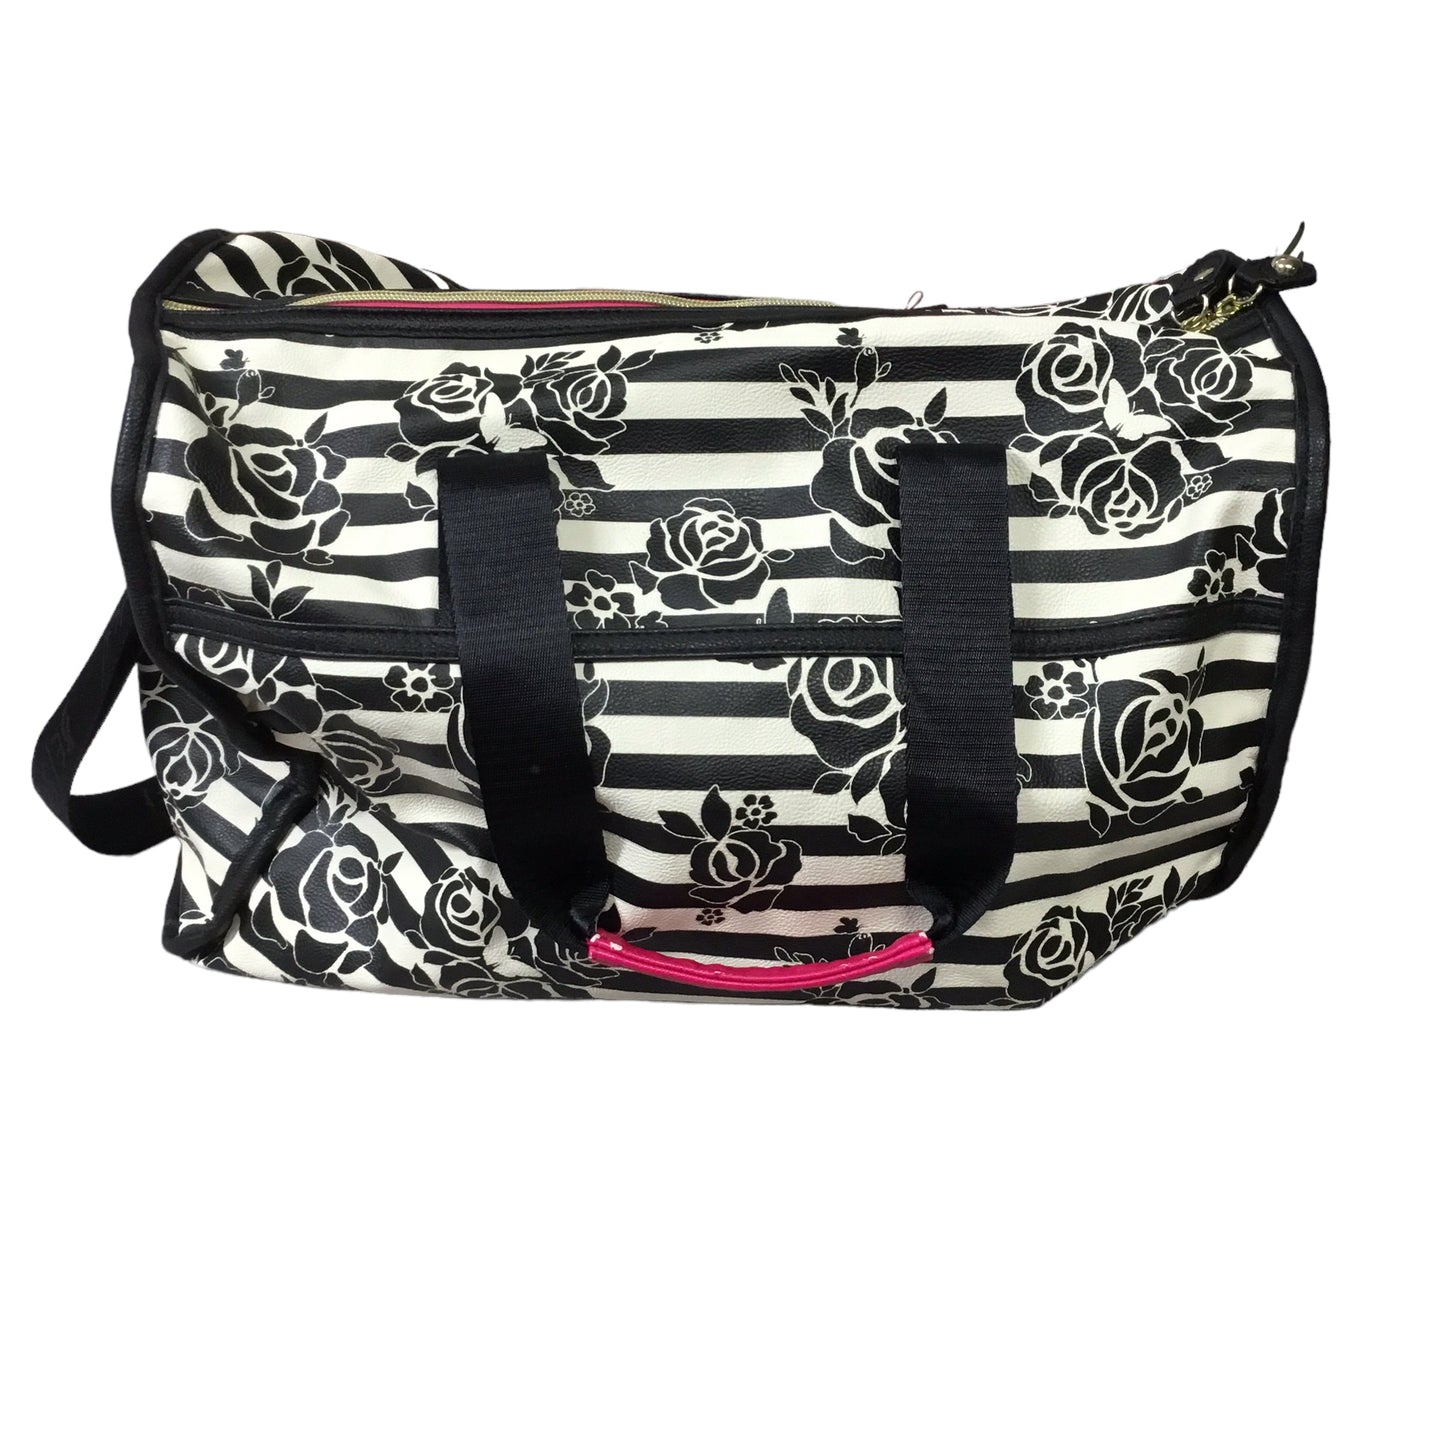 Tote By Betsey Johnson  Size: Medium